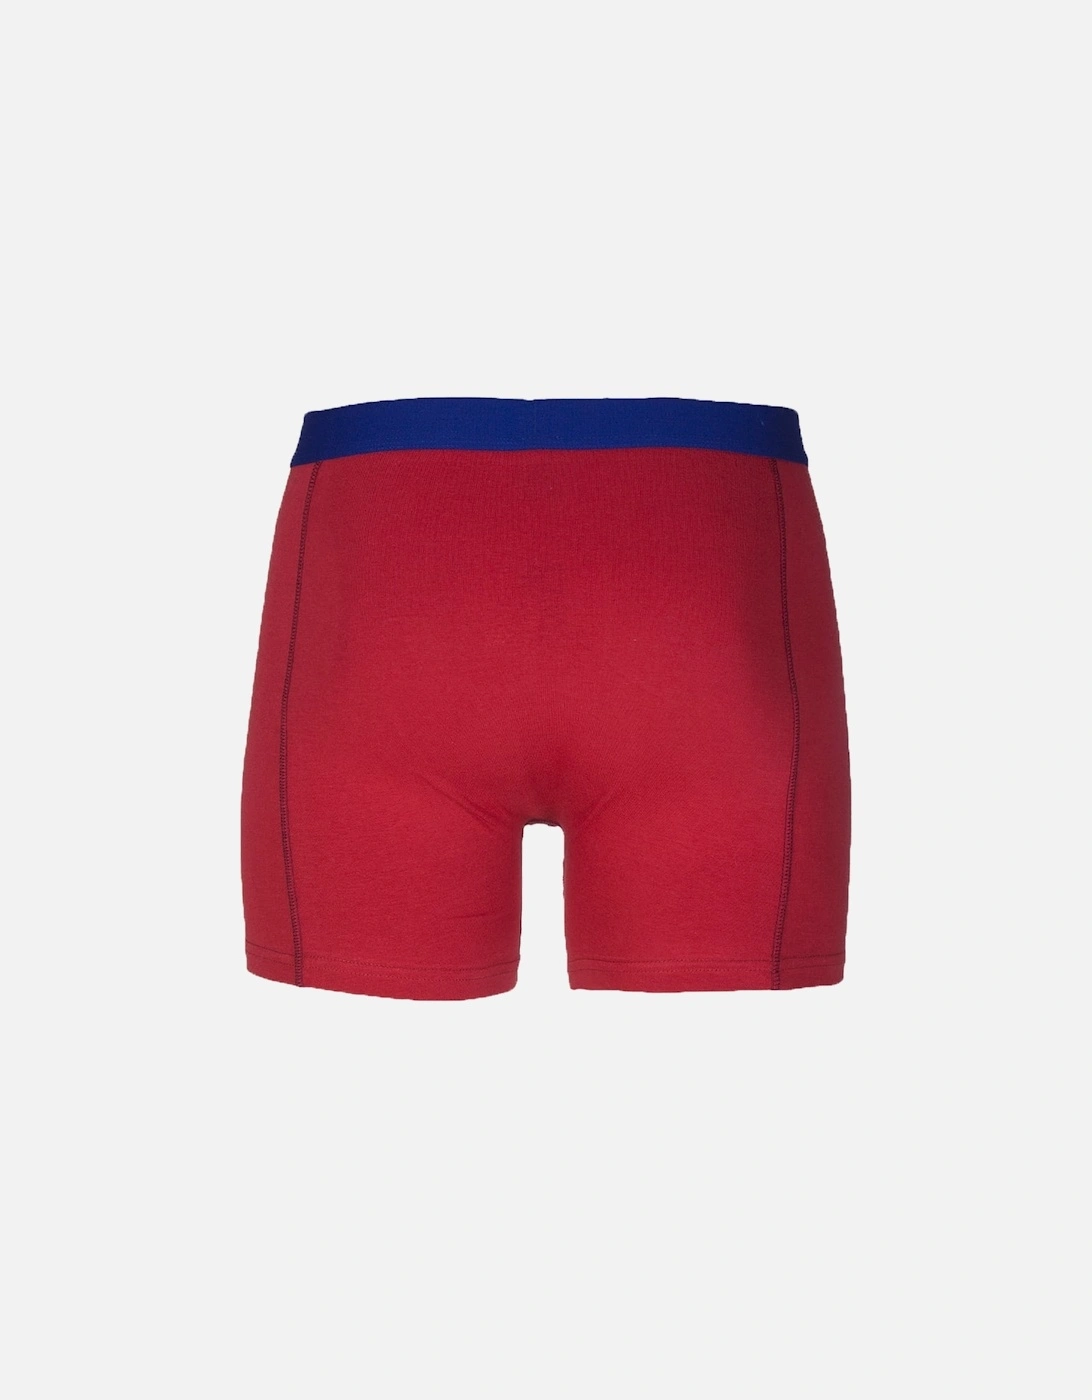 Mens Cotton Stretch Red 3 Pack Boxer Shorts